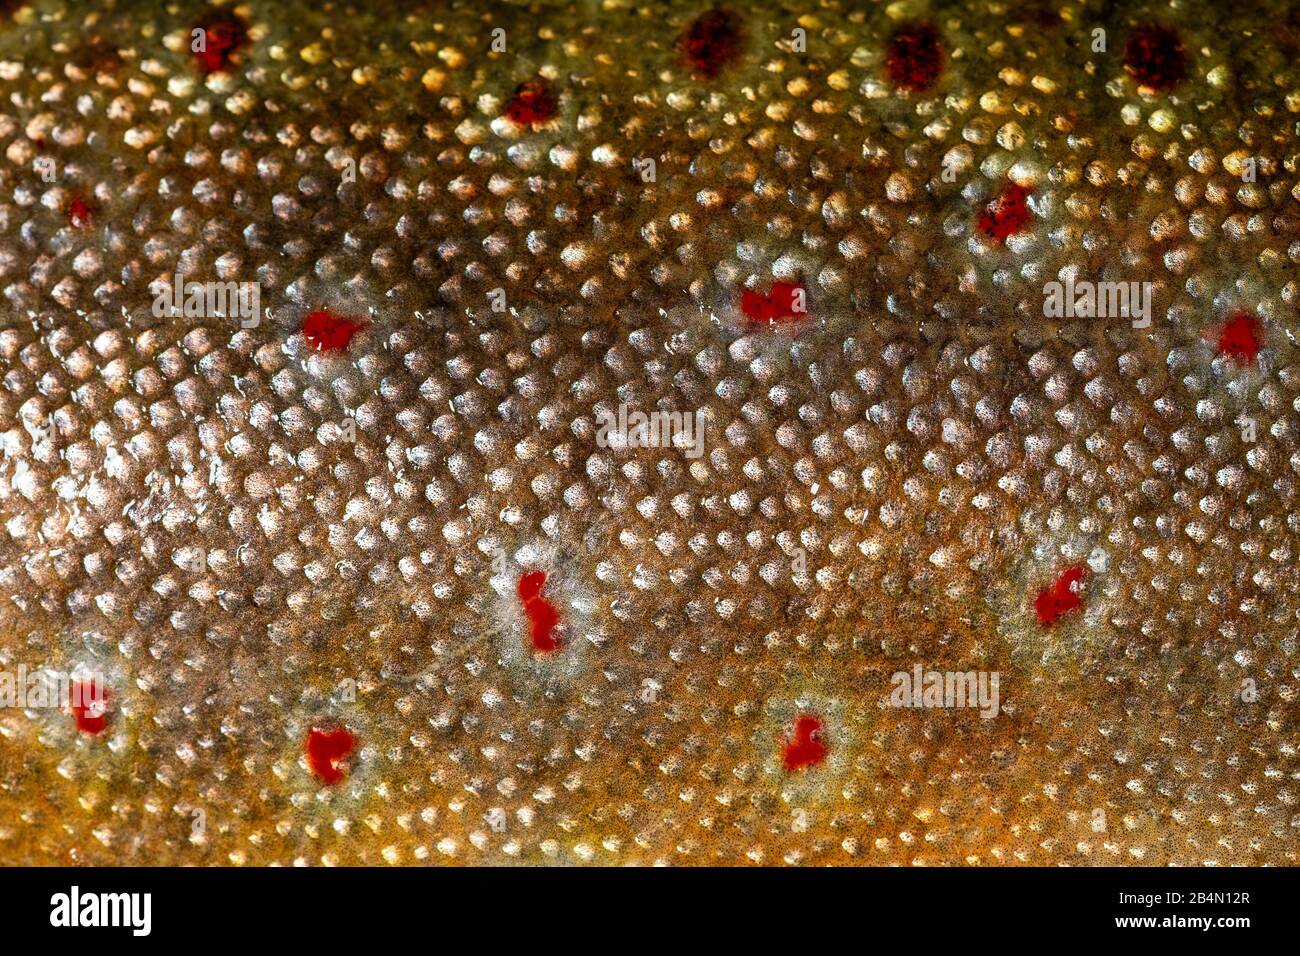 Fish skin or pattern of the brook trout Stock Photo